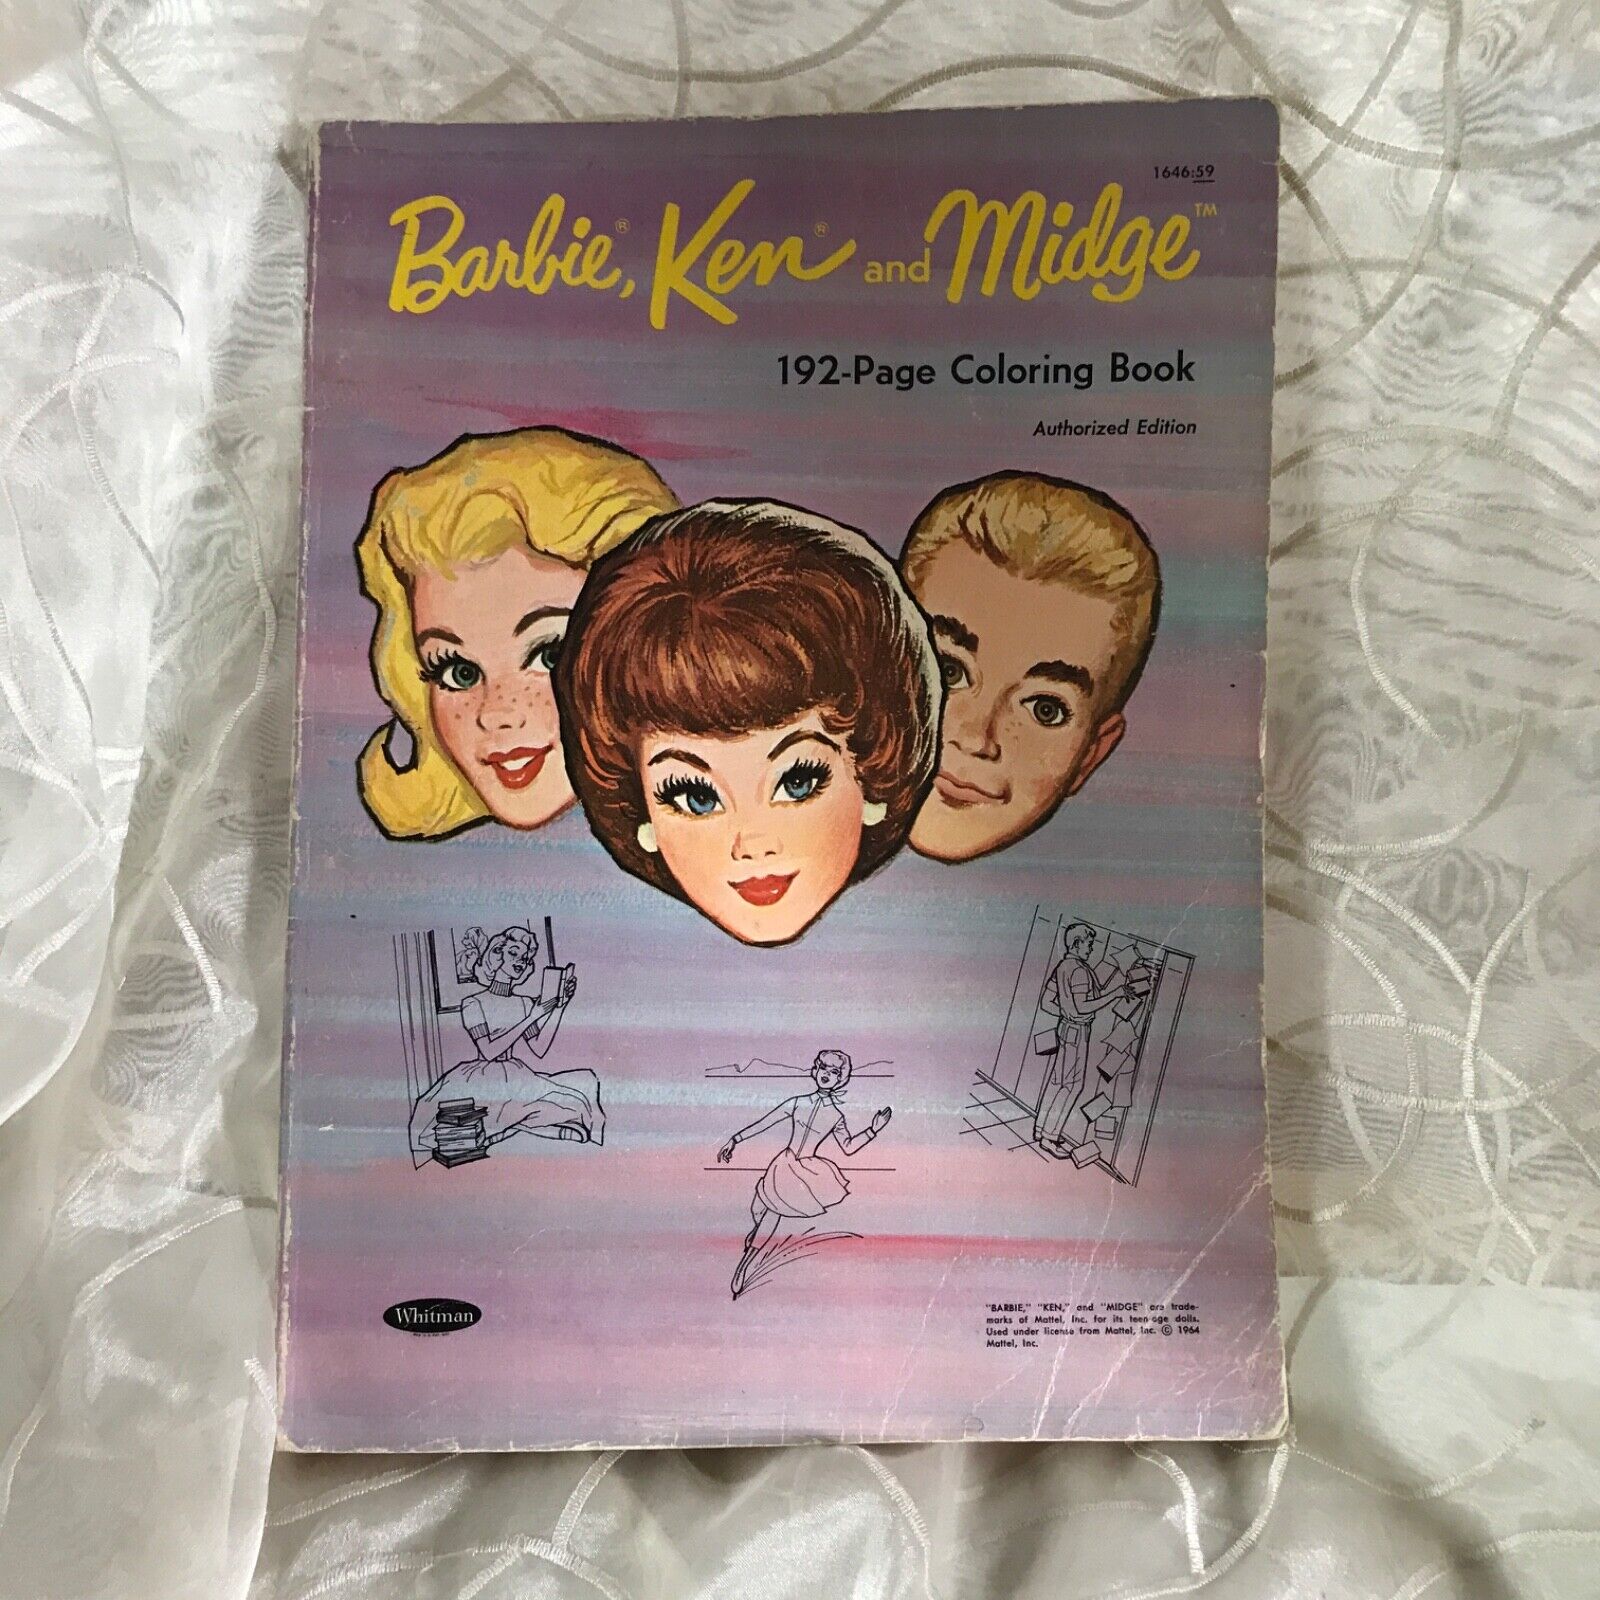 VINTAGE Barbie Ken and Midge Coloring Book 1964 USA 192 pages